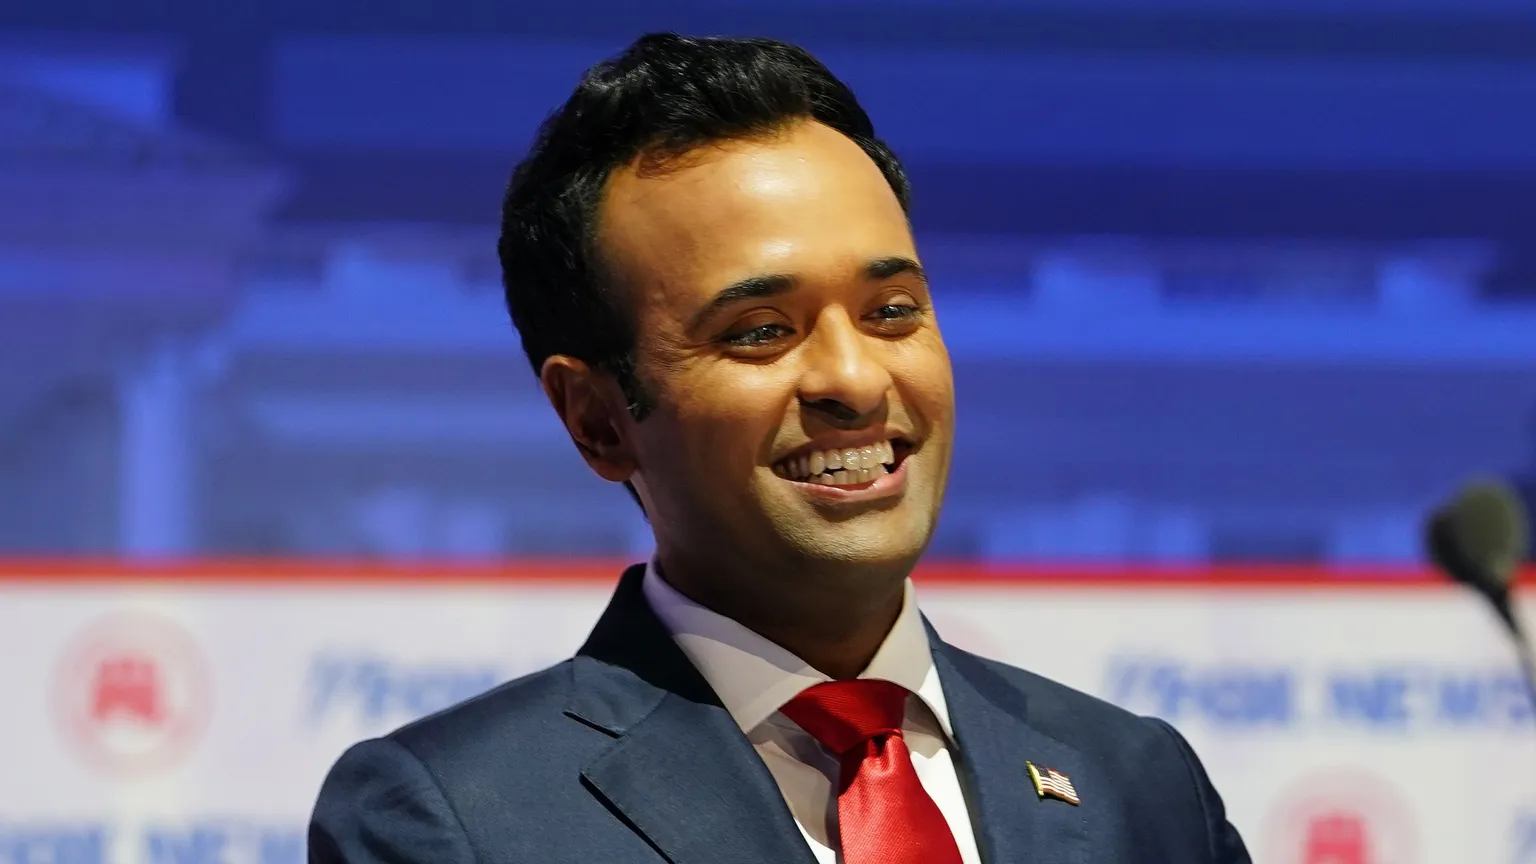 American entrepreneur Vivek Ramaswamy participated in the 2024 Republican Presidential debate in August 2023. Image: Aaron of L.A. Photography / Shutterstock.com